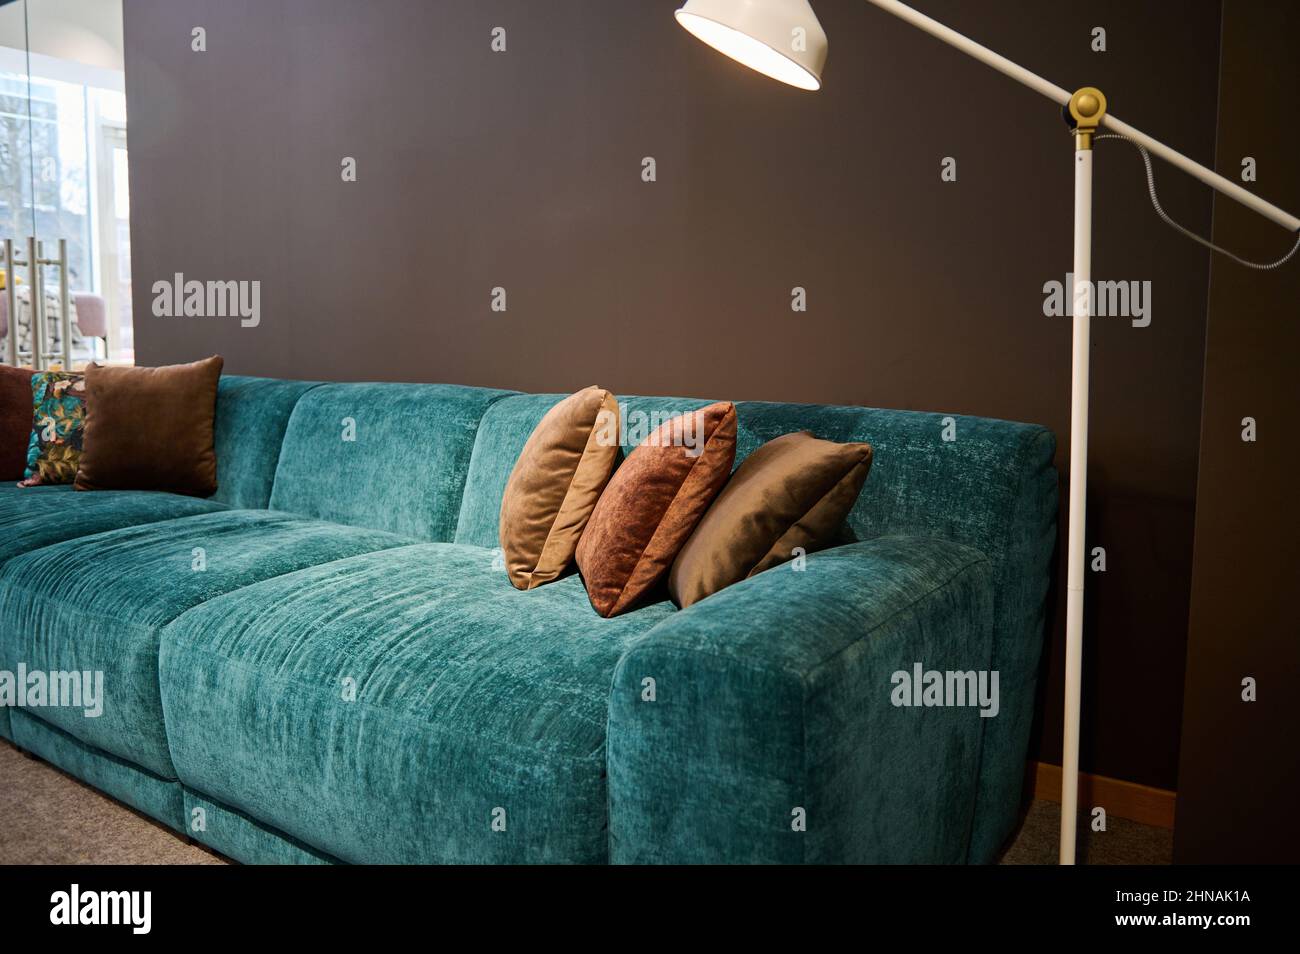 https://c8.alamy.com/comp/2HNAK1A/exhibition-of-modern-stylish-upholstered-furniture-in-the-showroom-of-a-furniture-store-close-up-of-a-turquoise-soft-velour-couch-and-brown-cushions-2HNAK1A.jpg